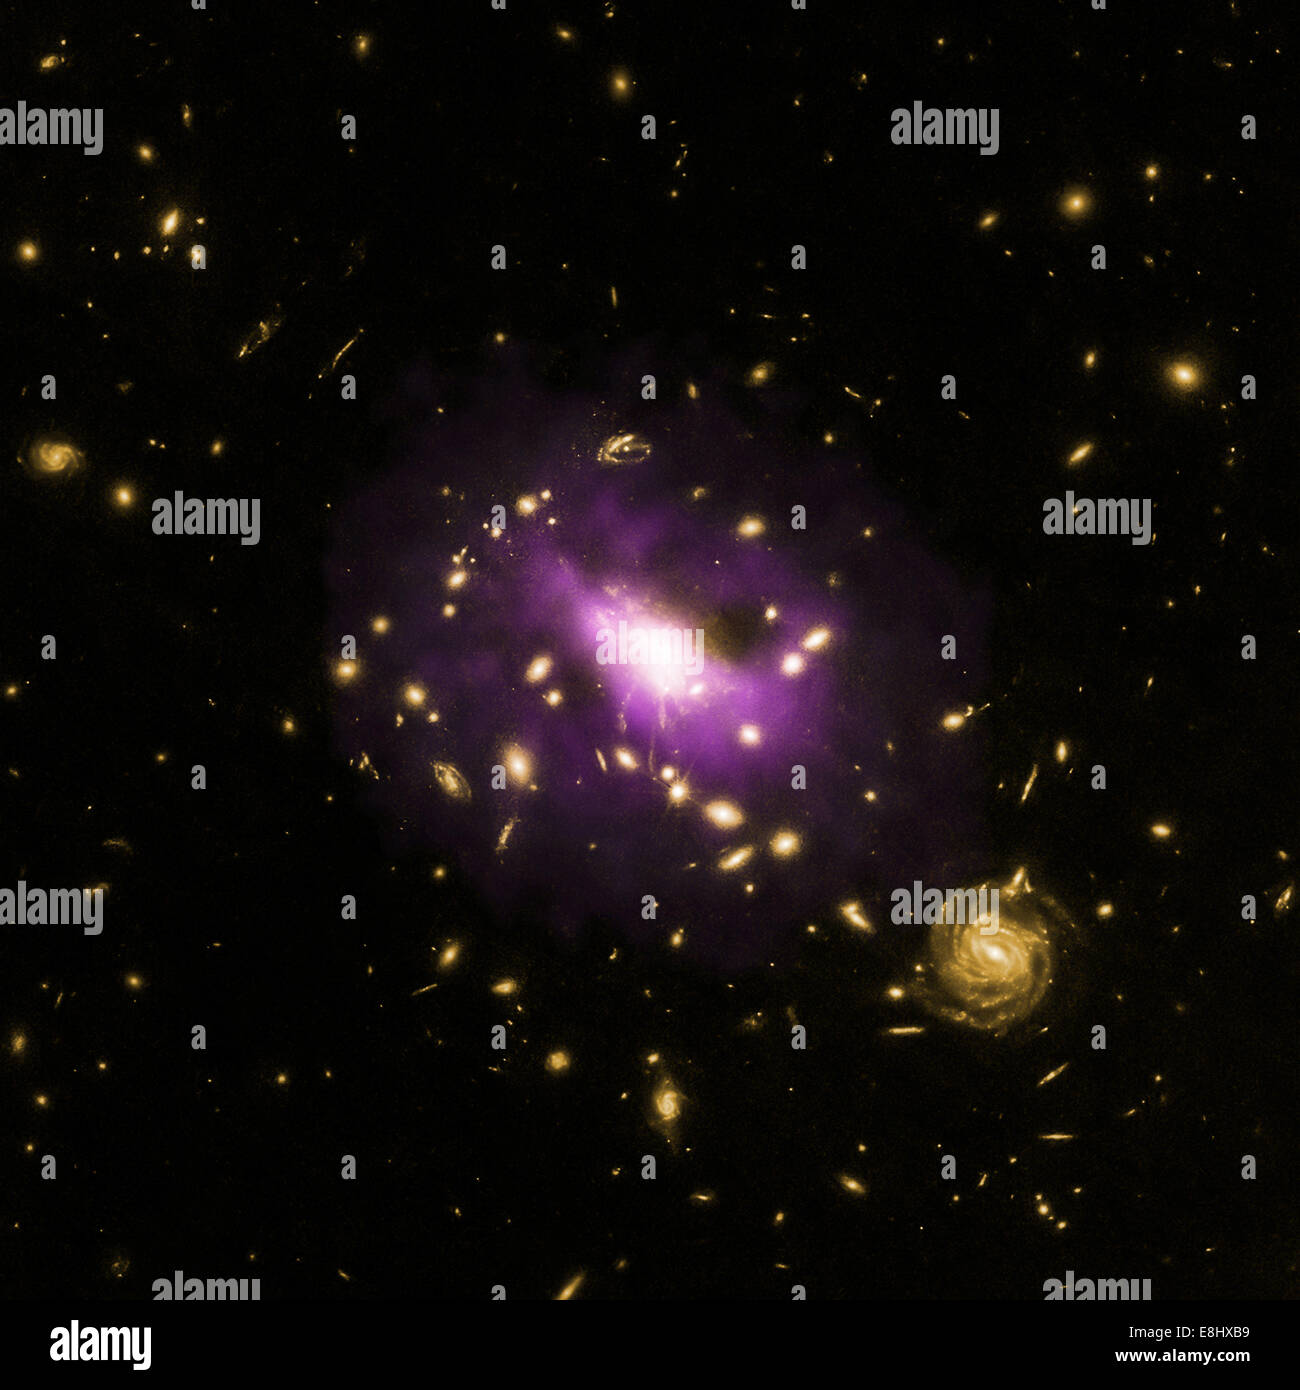 Astronomers have used NASA's Chandra X-ray Observatory and a suite of other telescopes to reveal one of the most powerful black Stock Photo